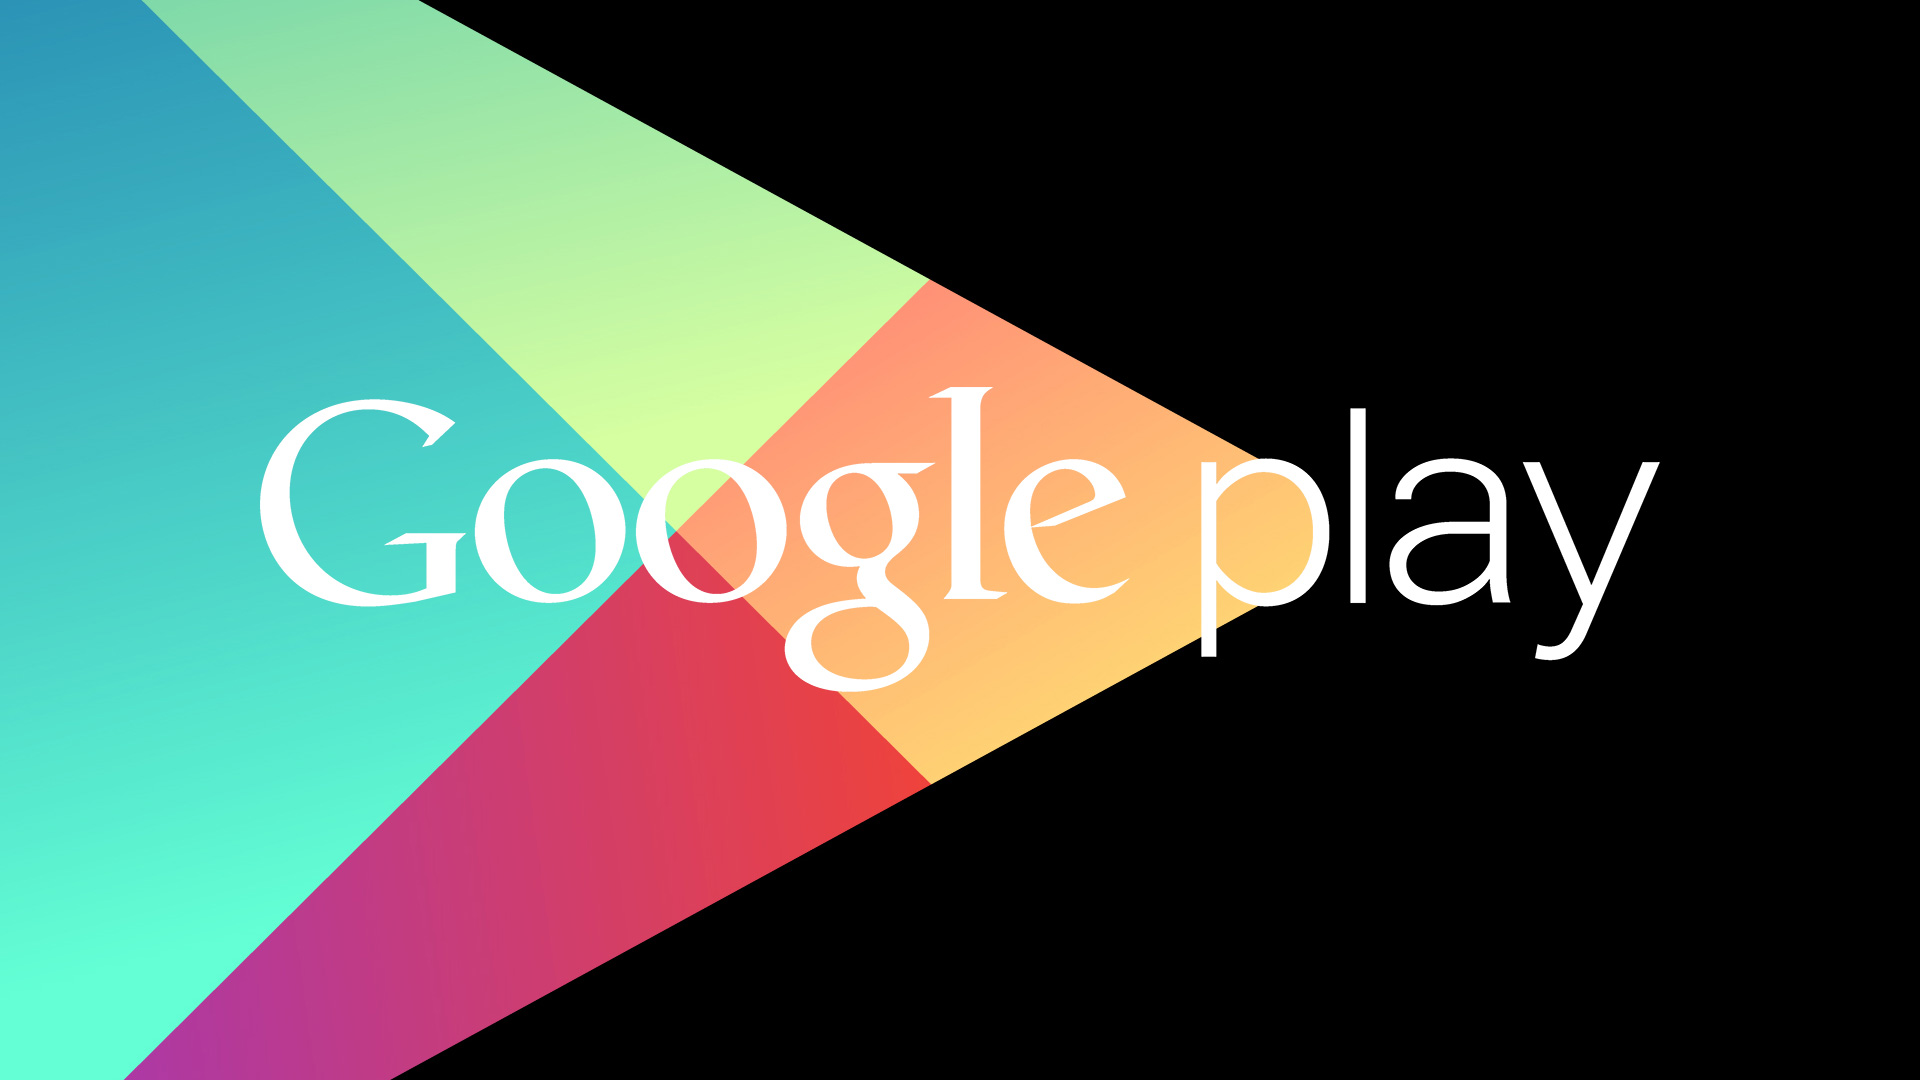 Google Play rolling out app data collection labels